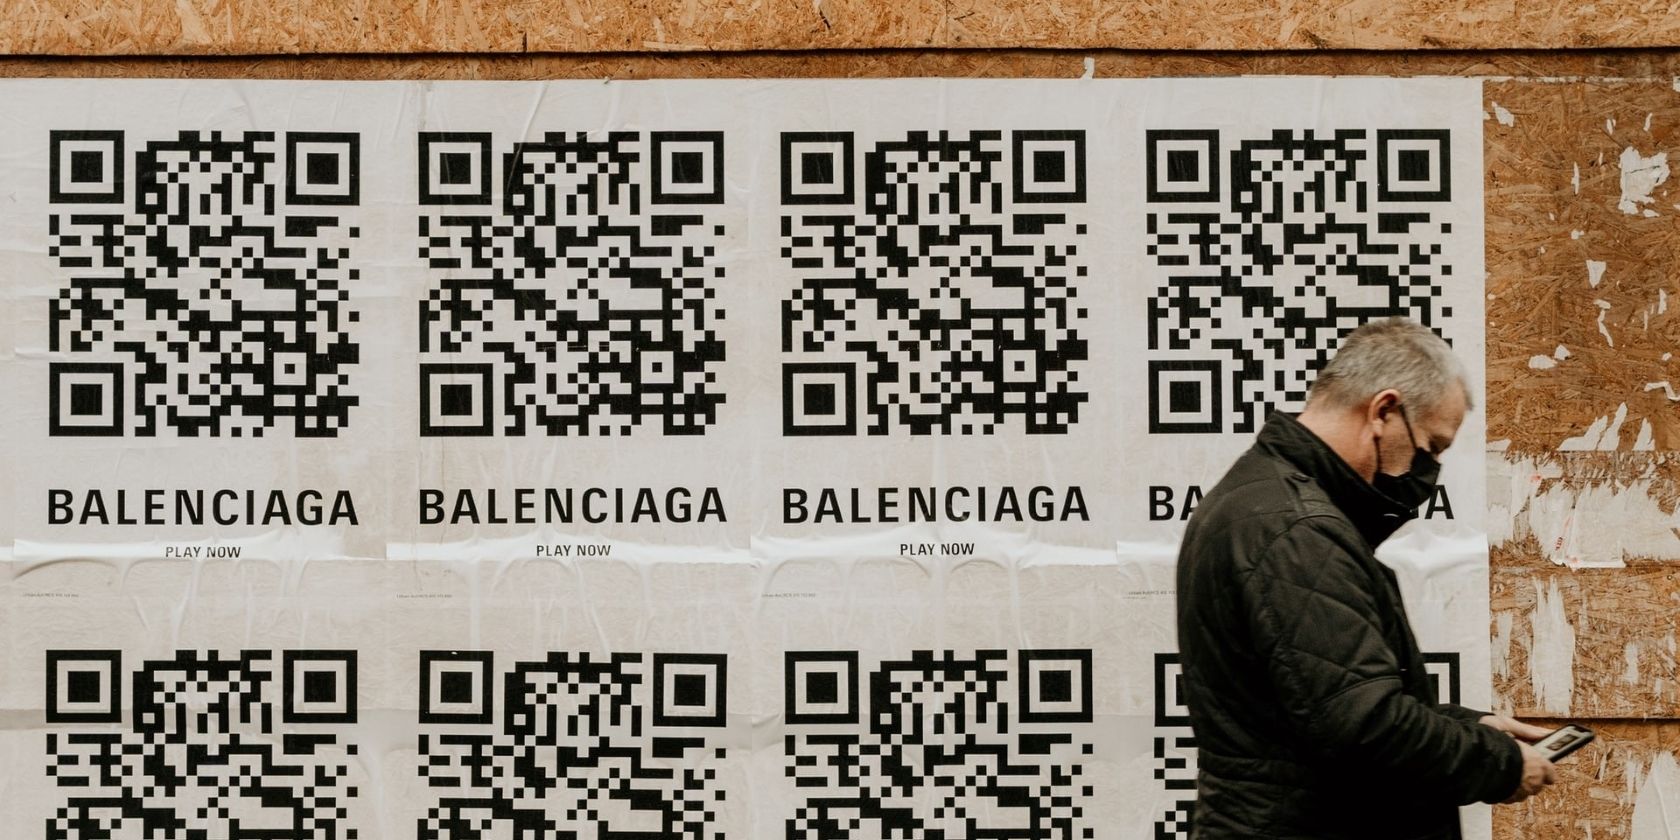 QR codes on wall and a man walking with phone in his hand